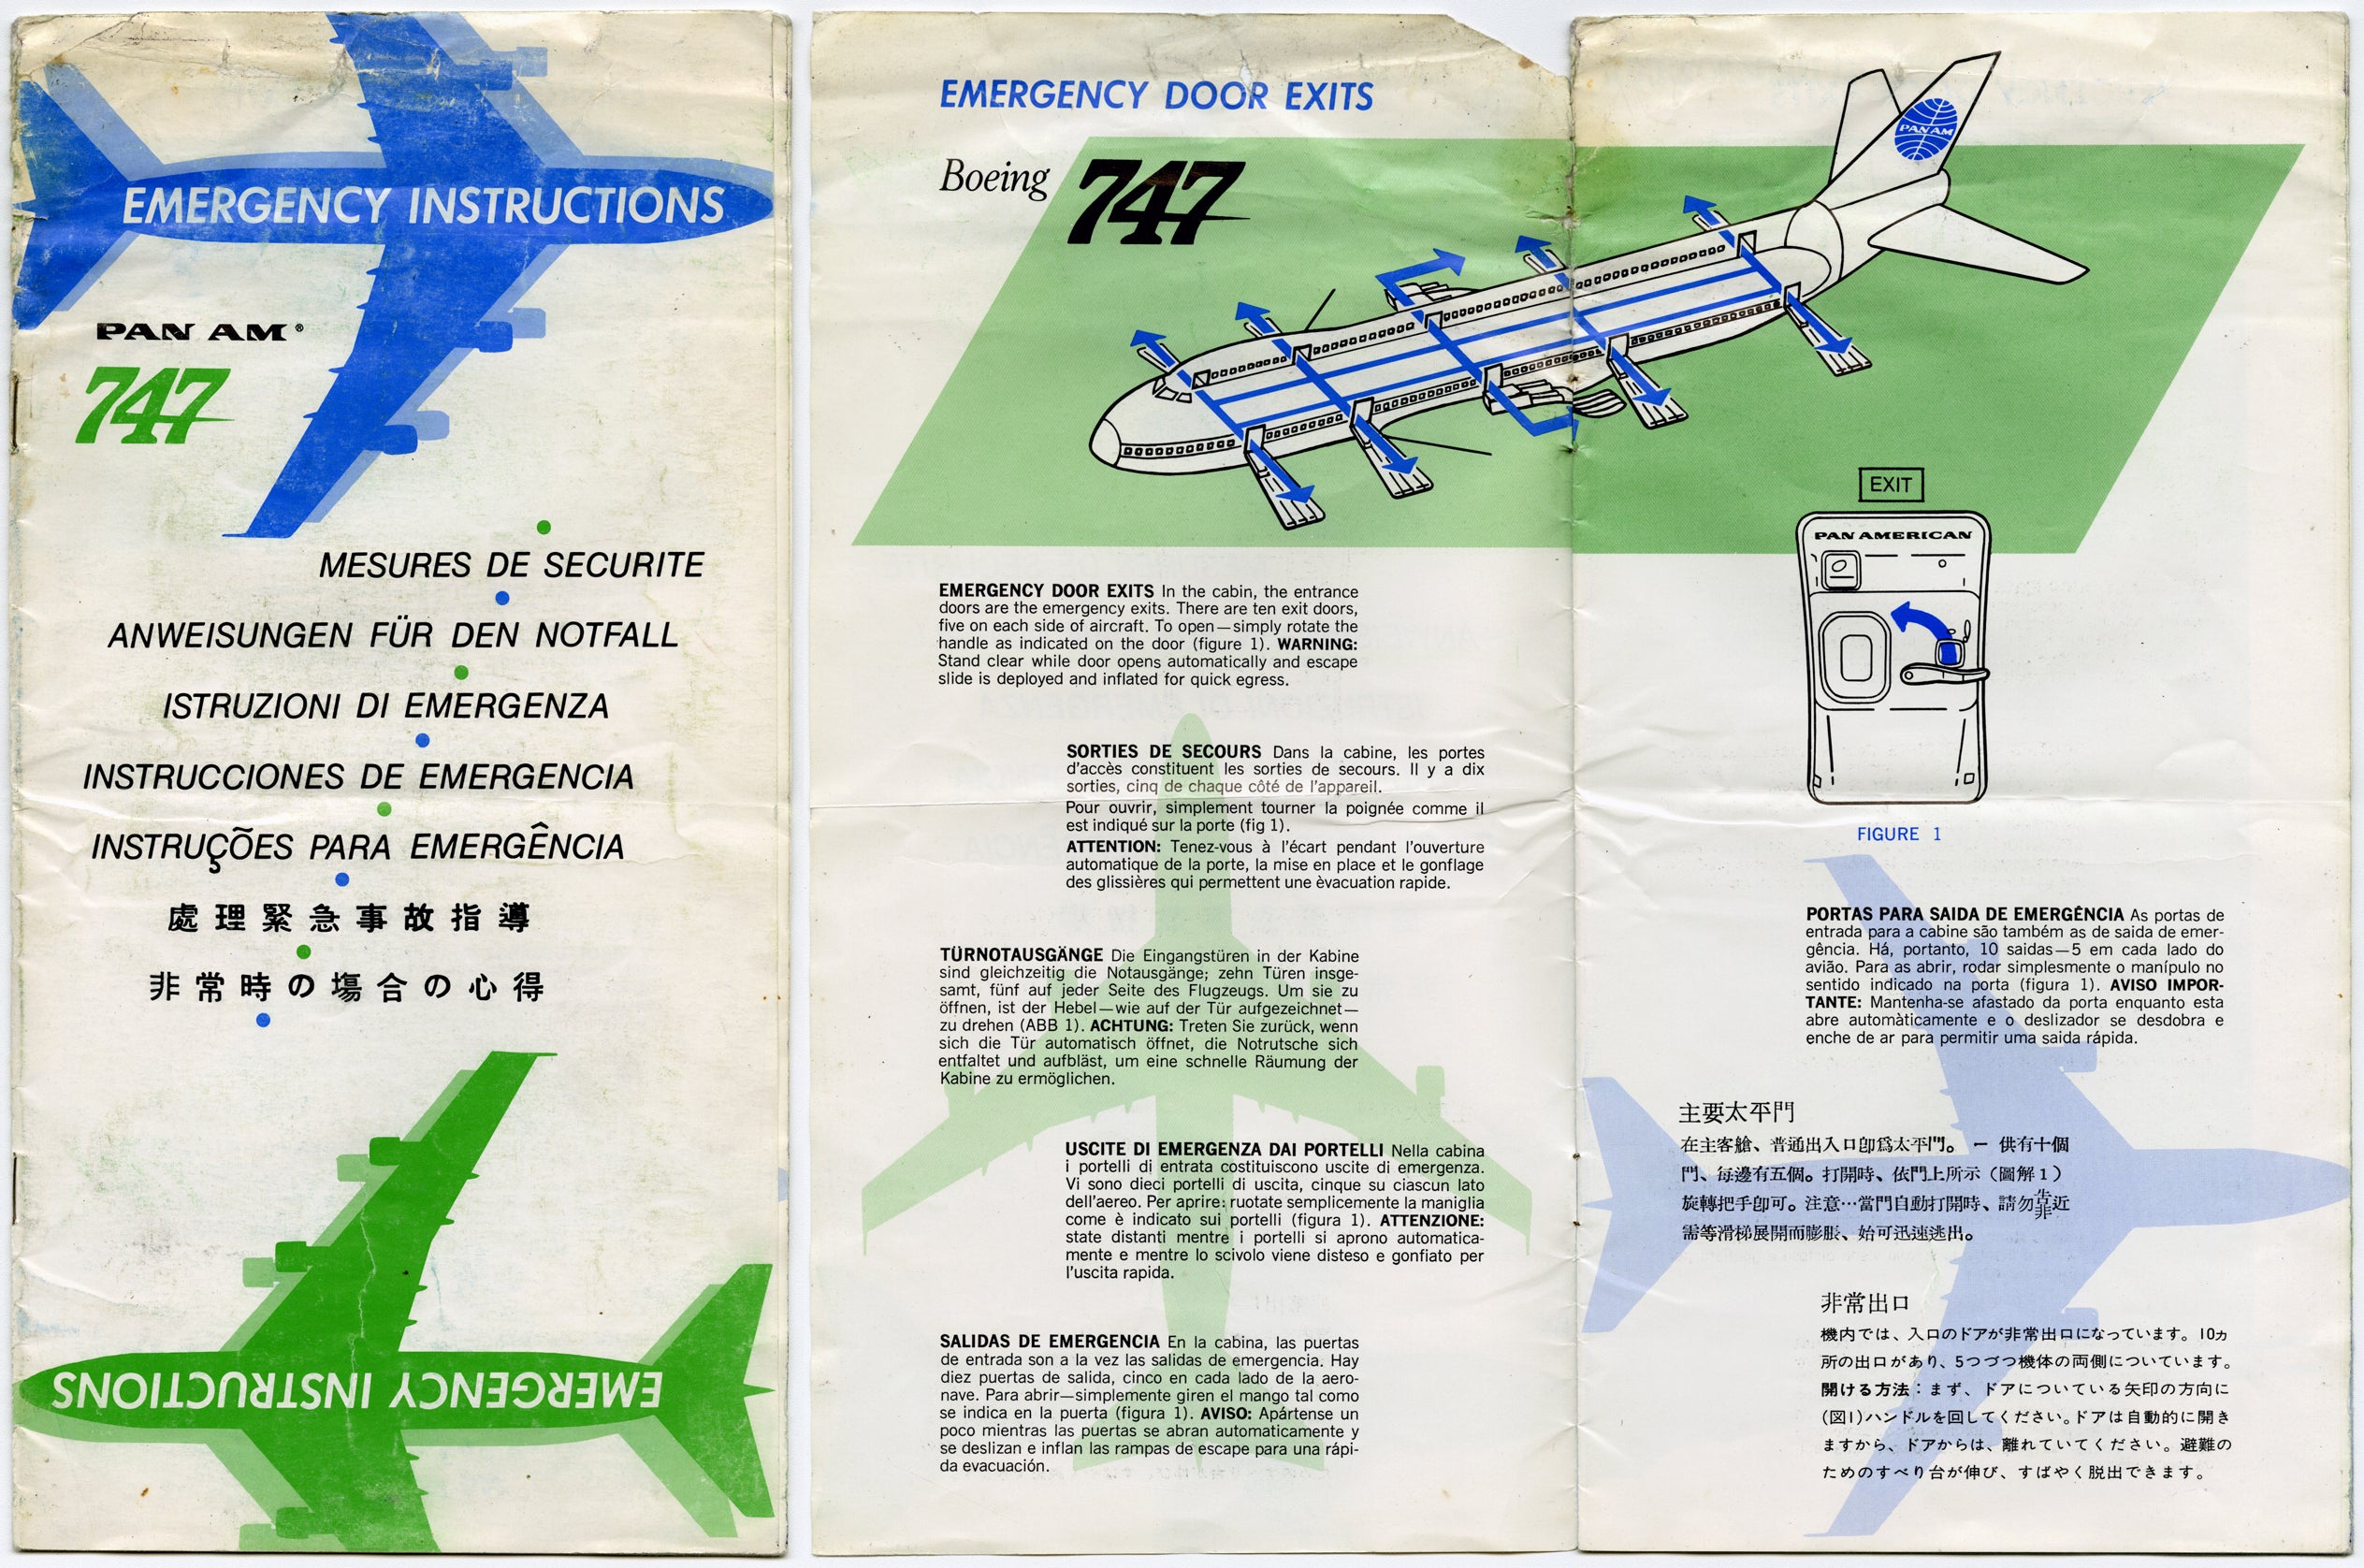  Pan Am Boeing 747 safety information card  1970